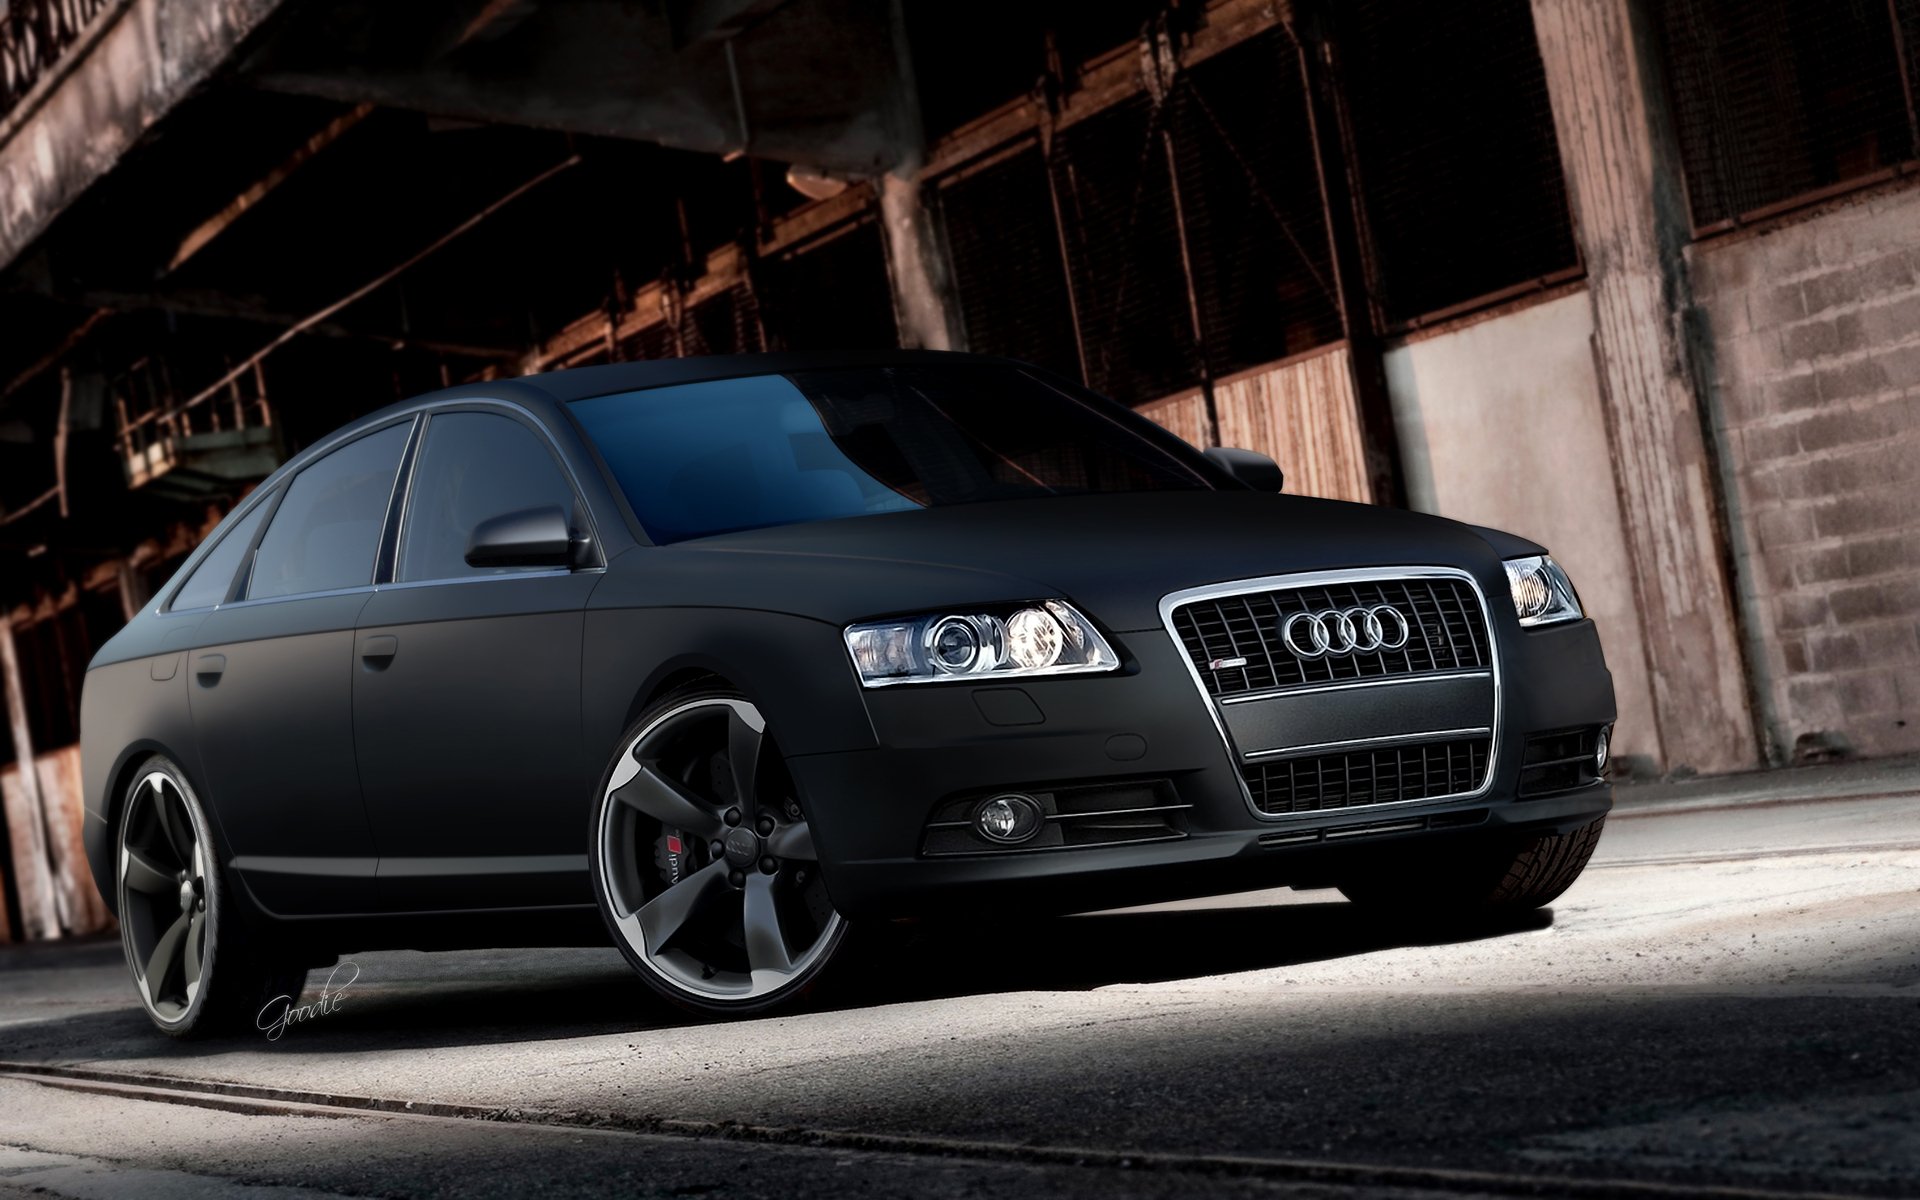 Audi A6 HD Wallpaper and Background Image